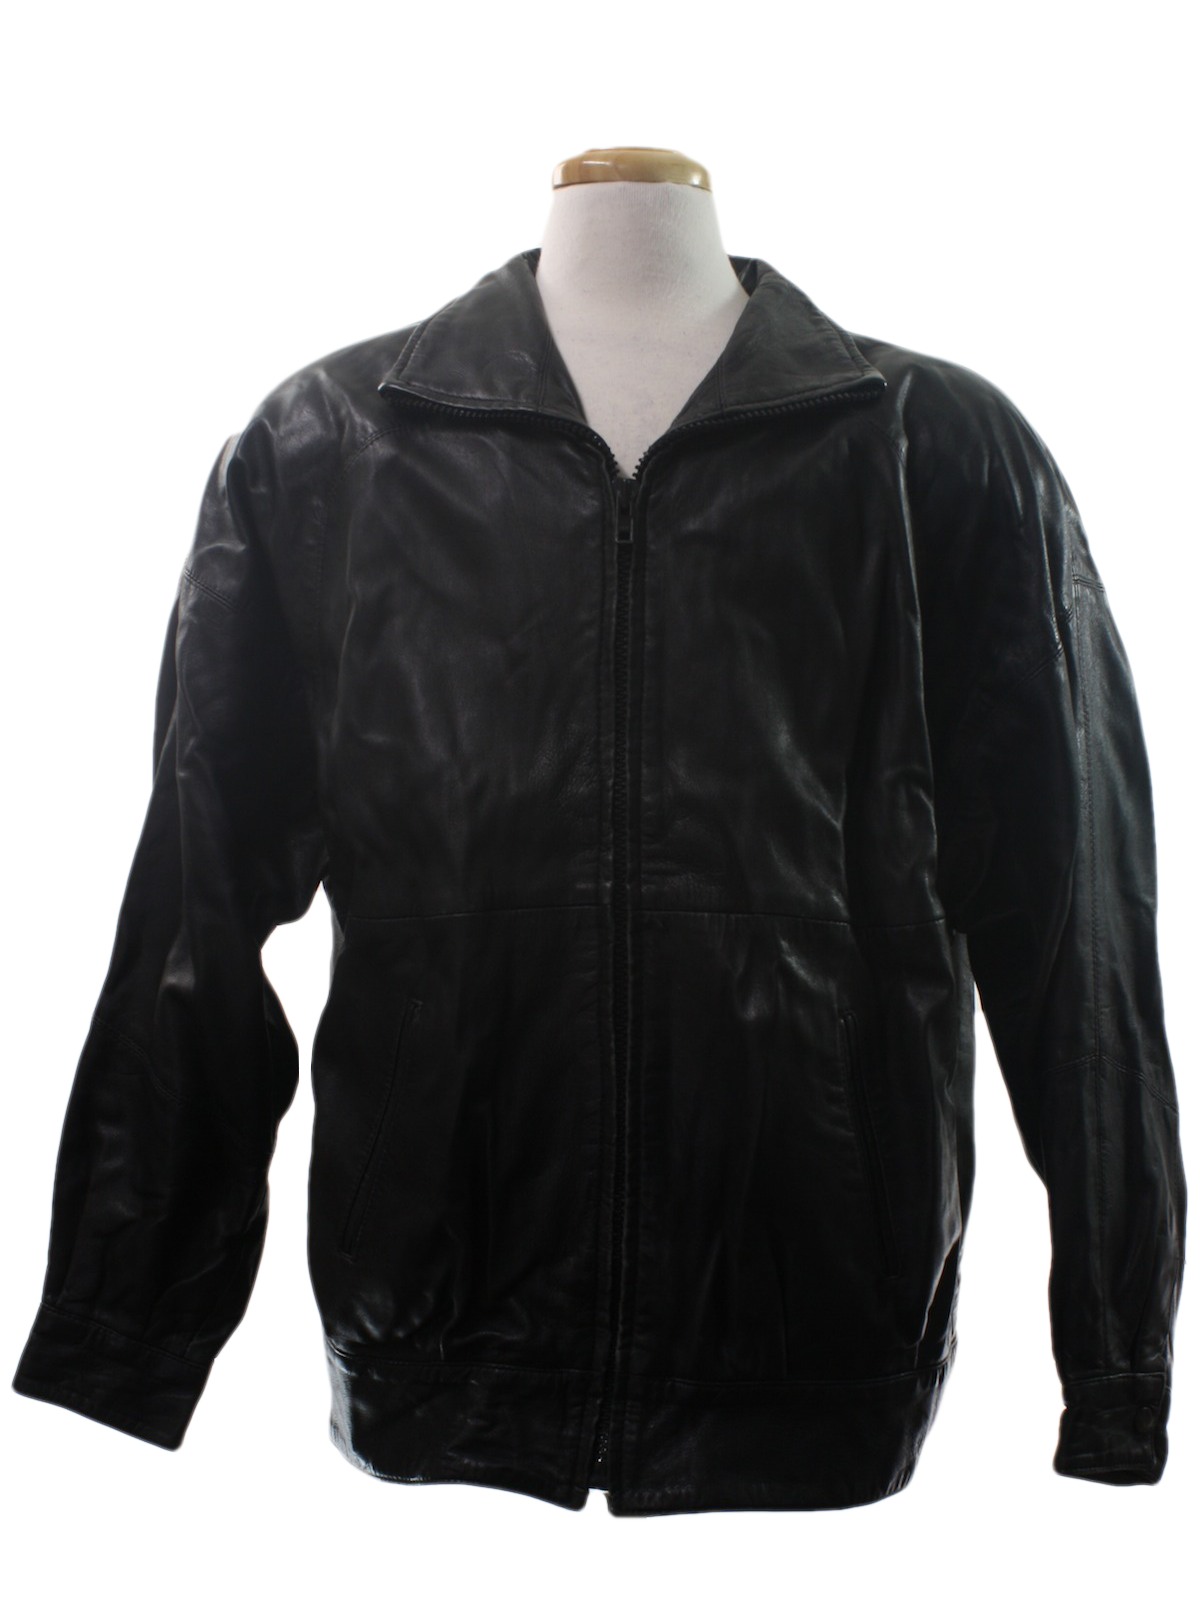 Retro 80s Leather Jacket (Marc by Andrew Marc) : 80s -Marc by Andrew ...